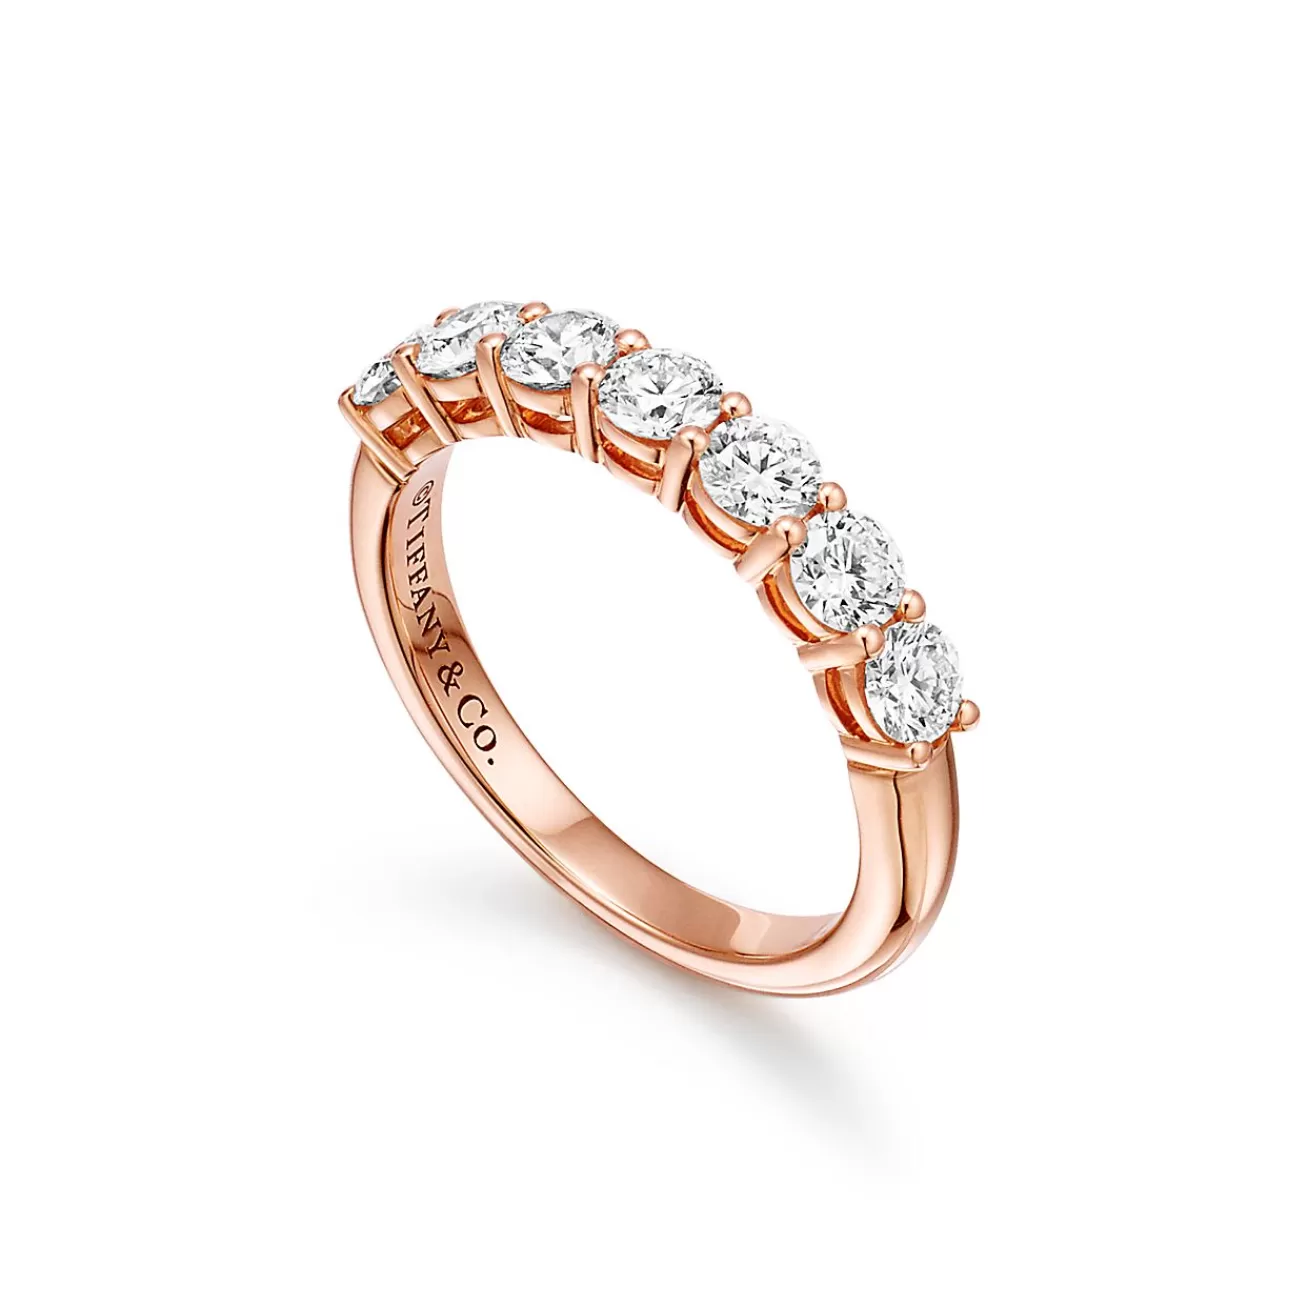 Tiffany & Co. Tiffany Forever Band Ring in Rose Gold with a Half-circle of Diamonds, 3.5 mm | ^Women Rings | Rose Gold Jewelry